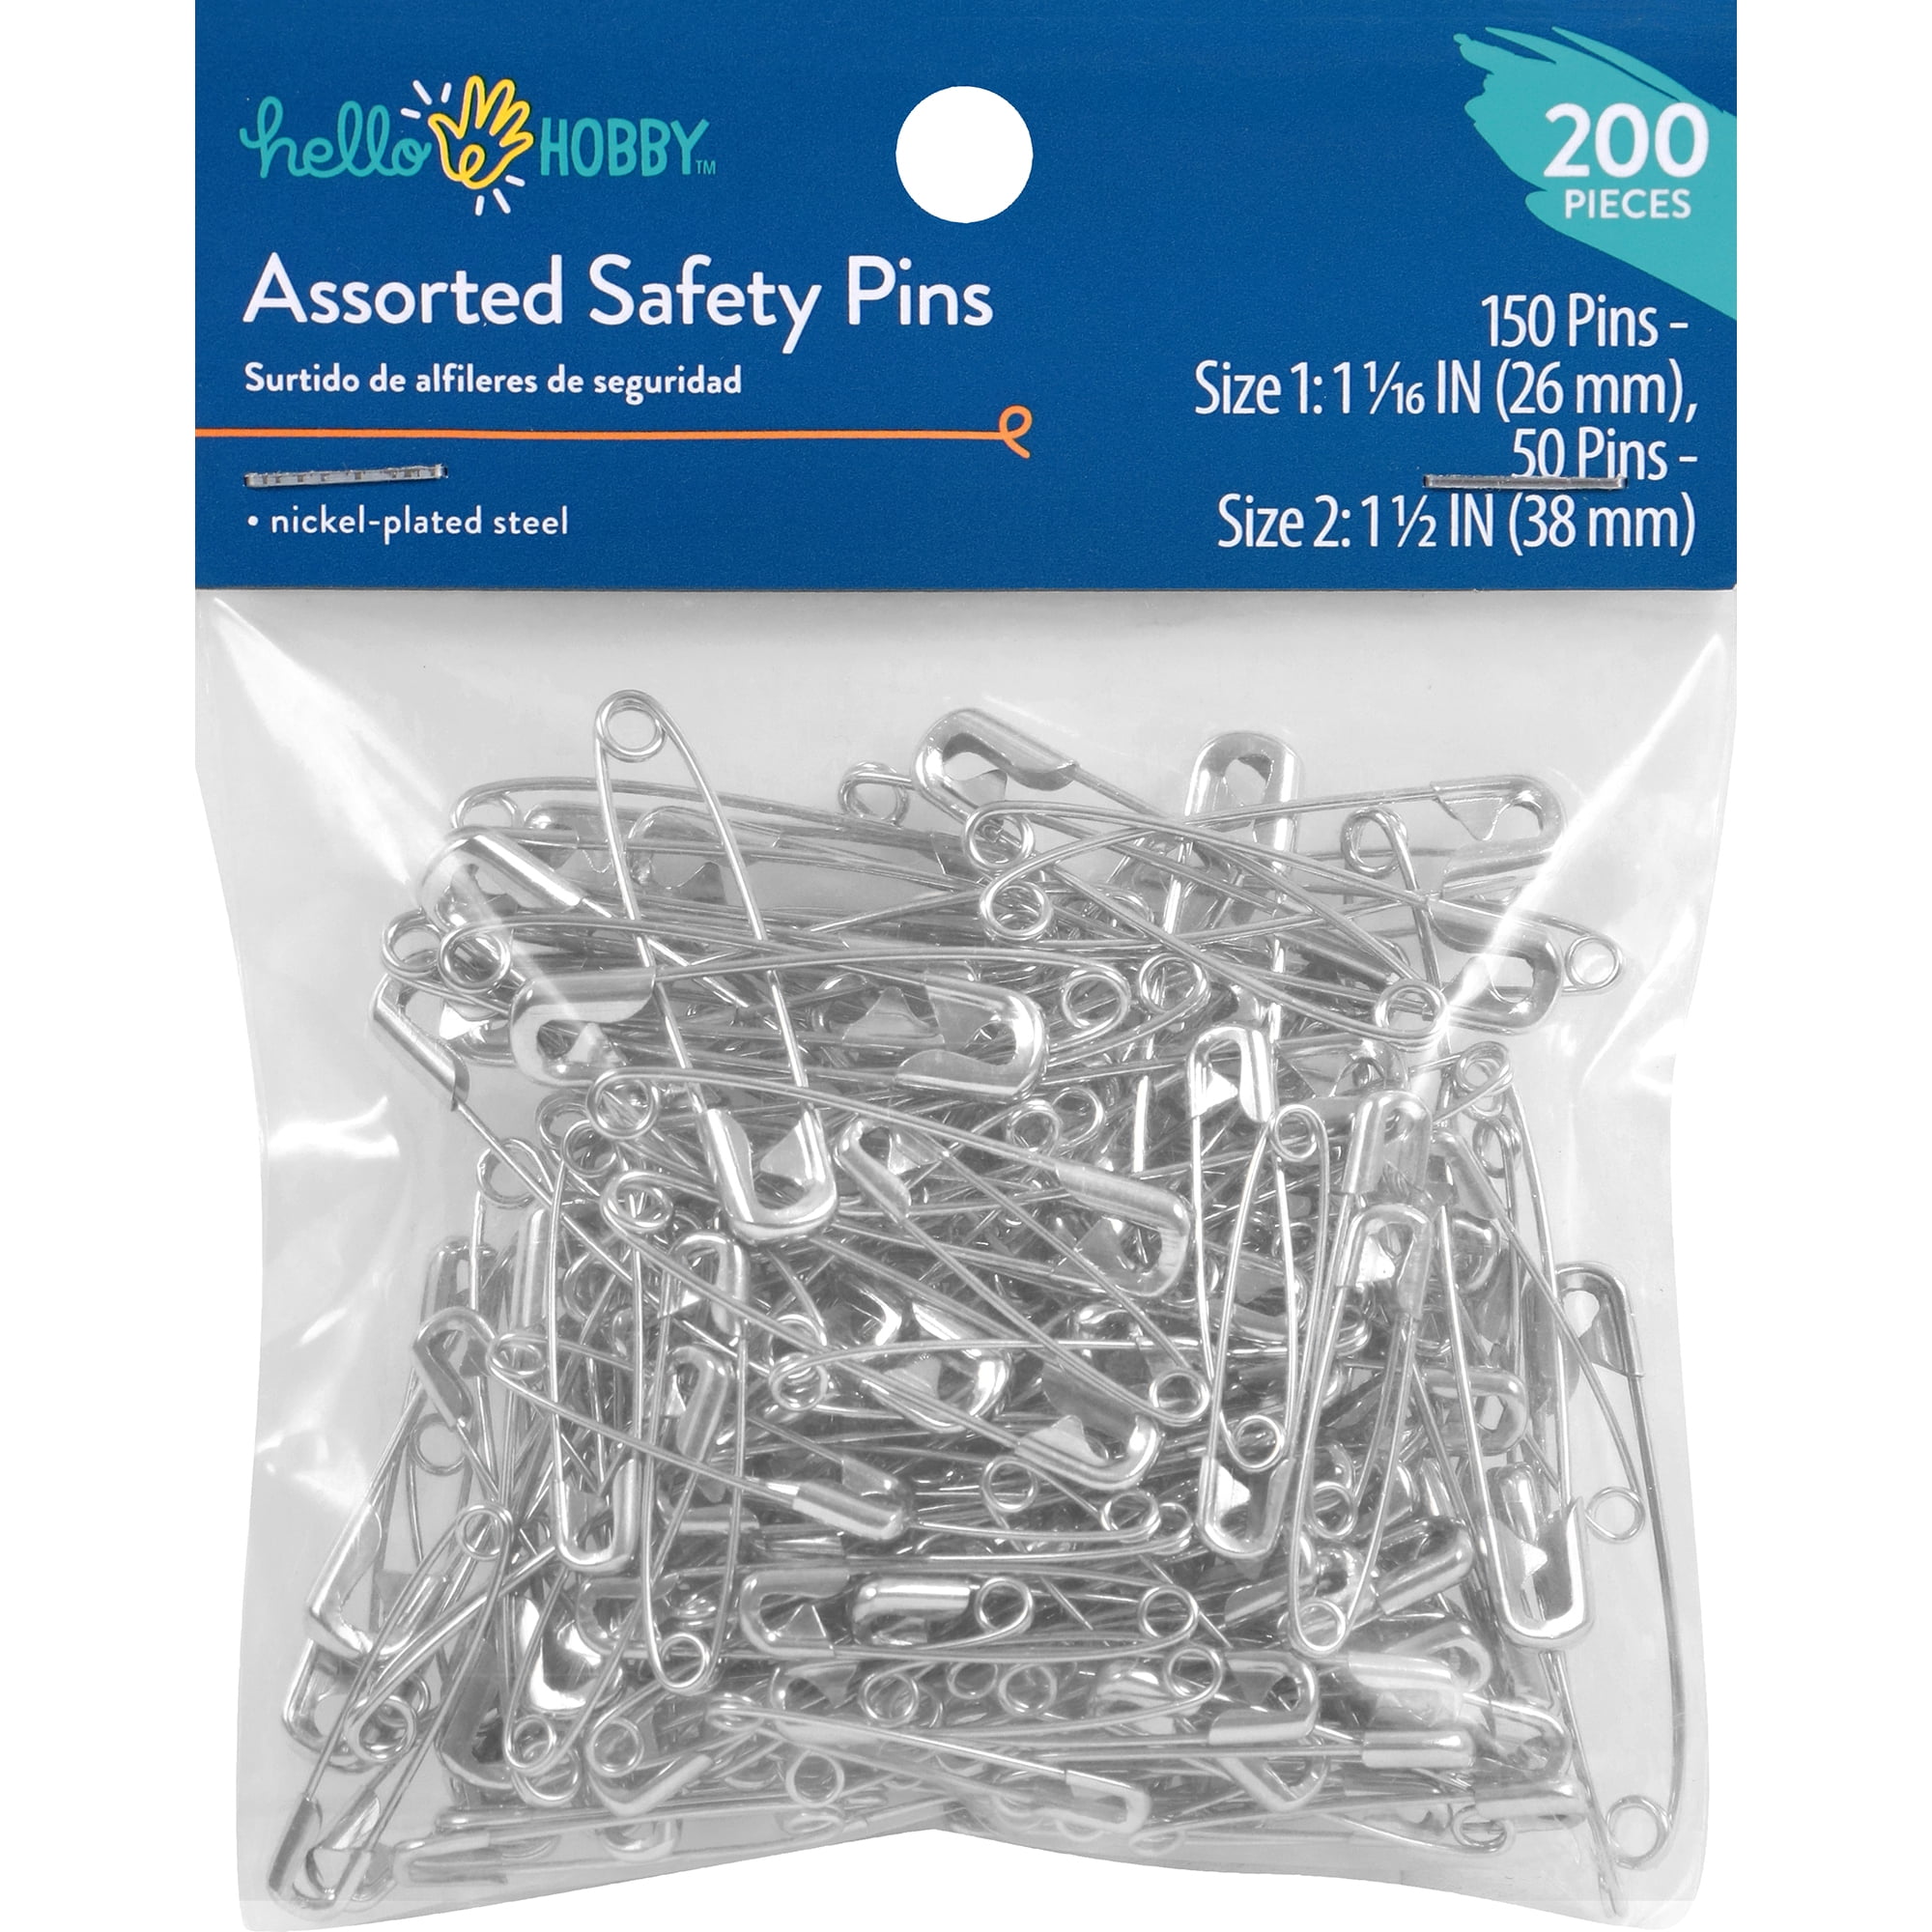 School Smart Safety Pin, No 2, 1-1/2 in, Steel, Nickel Plated, Pack of 144